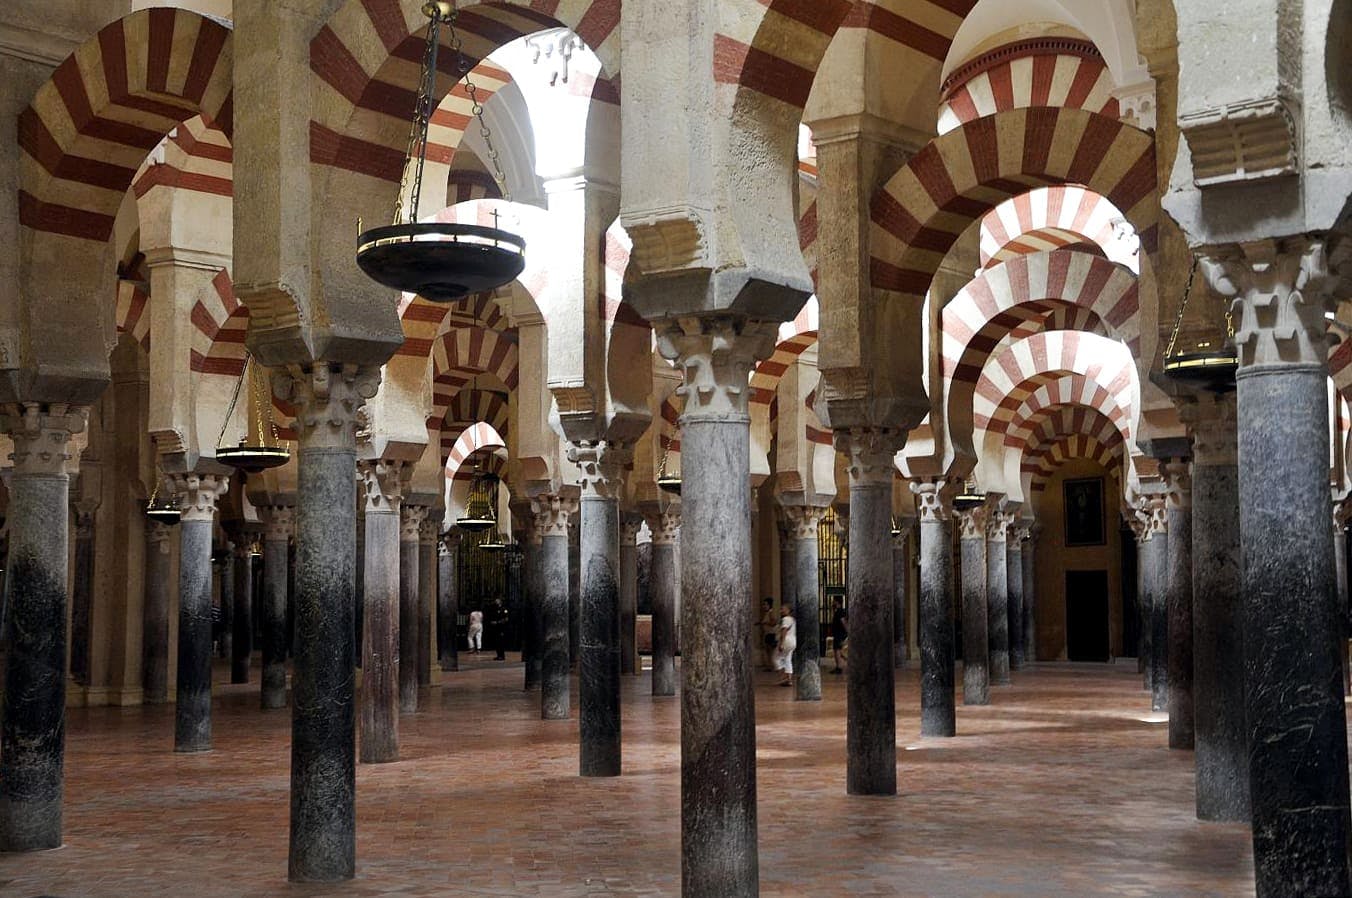 Cordoba Old Town Guided Tour including Mosque Visit